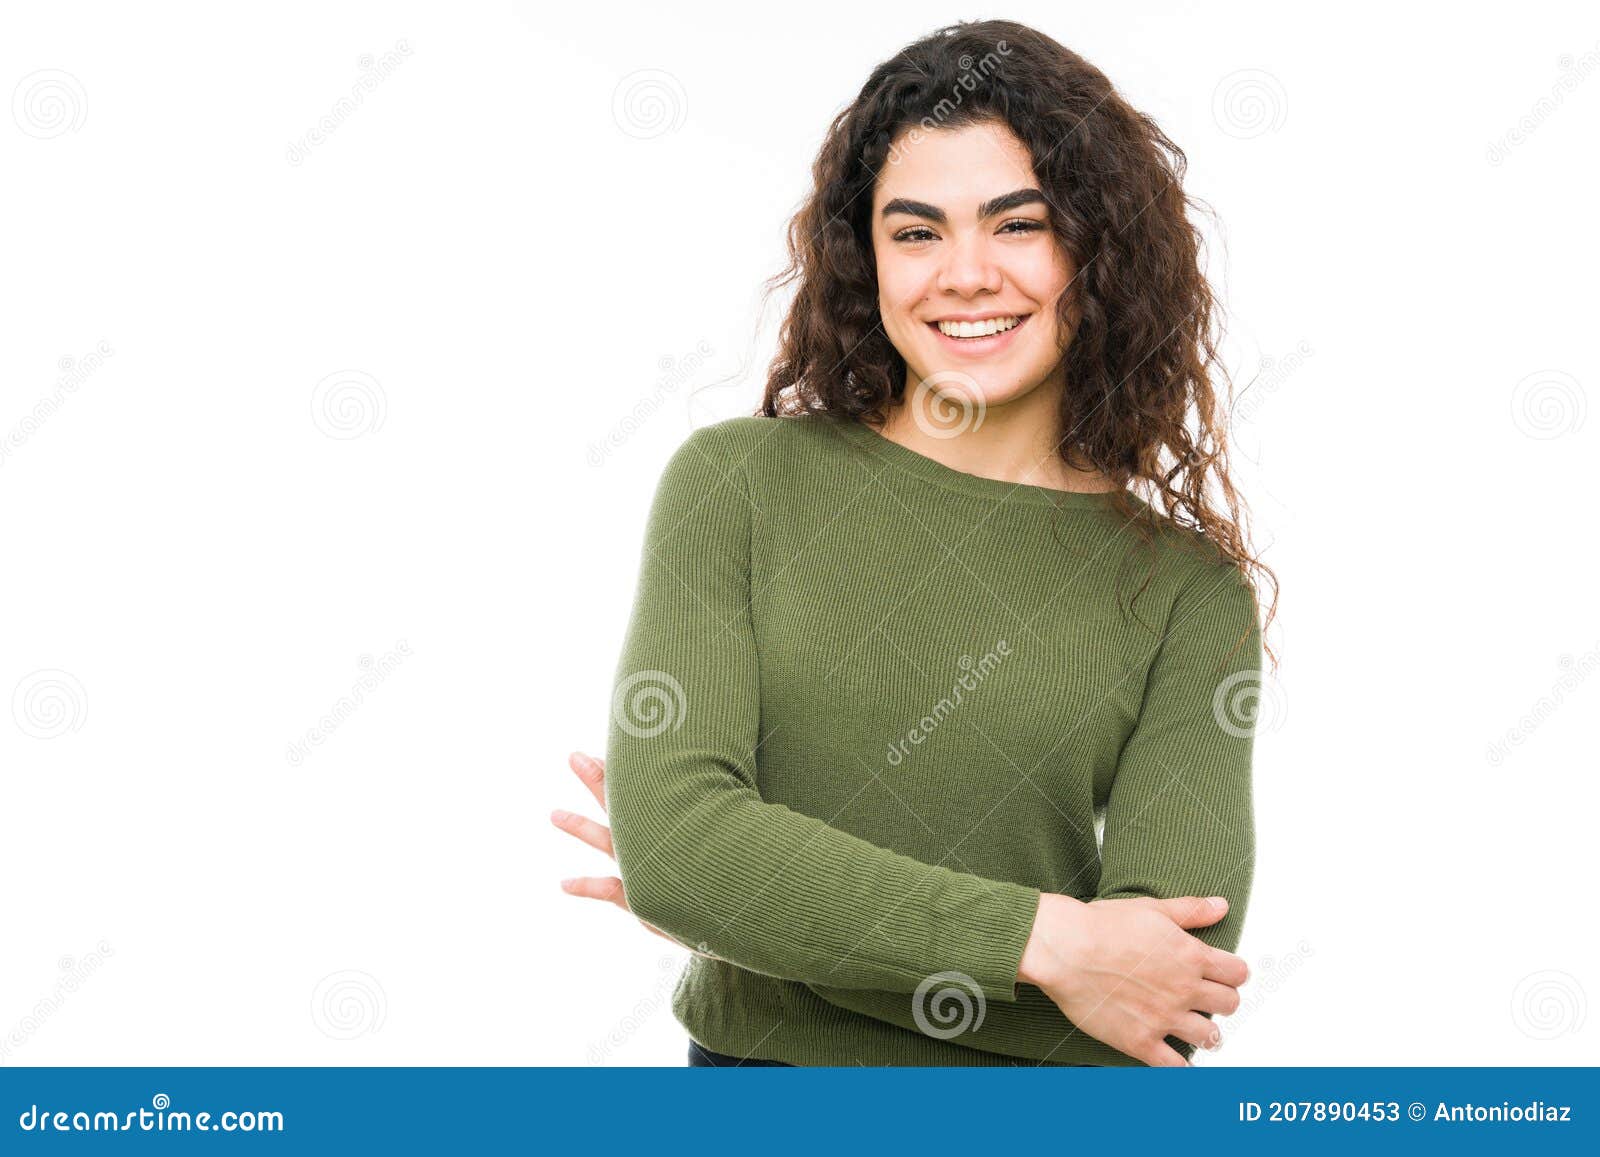 Attractive Young Woman Flashing a Beaming Smile Stock Image - Image of ...